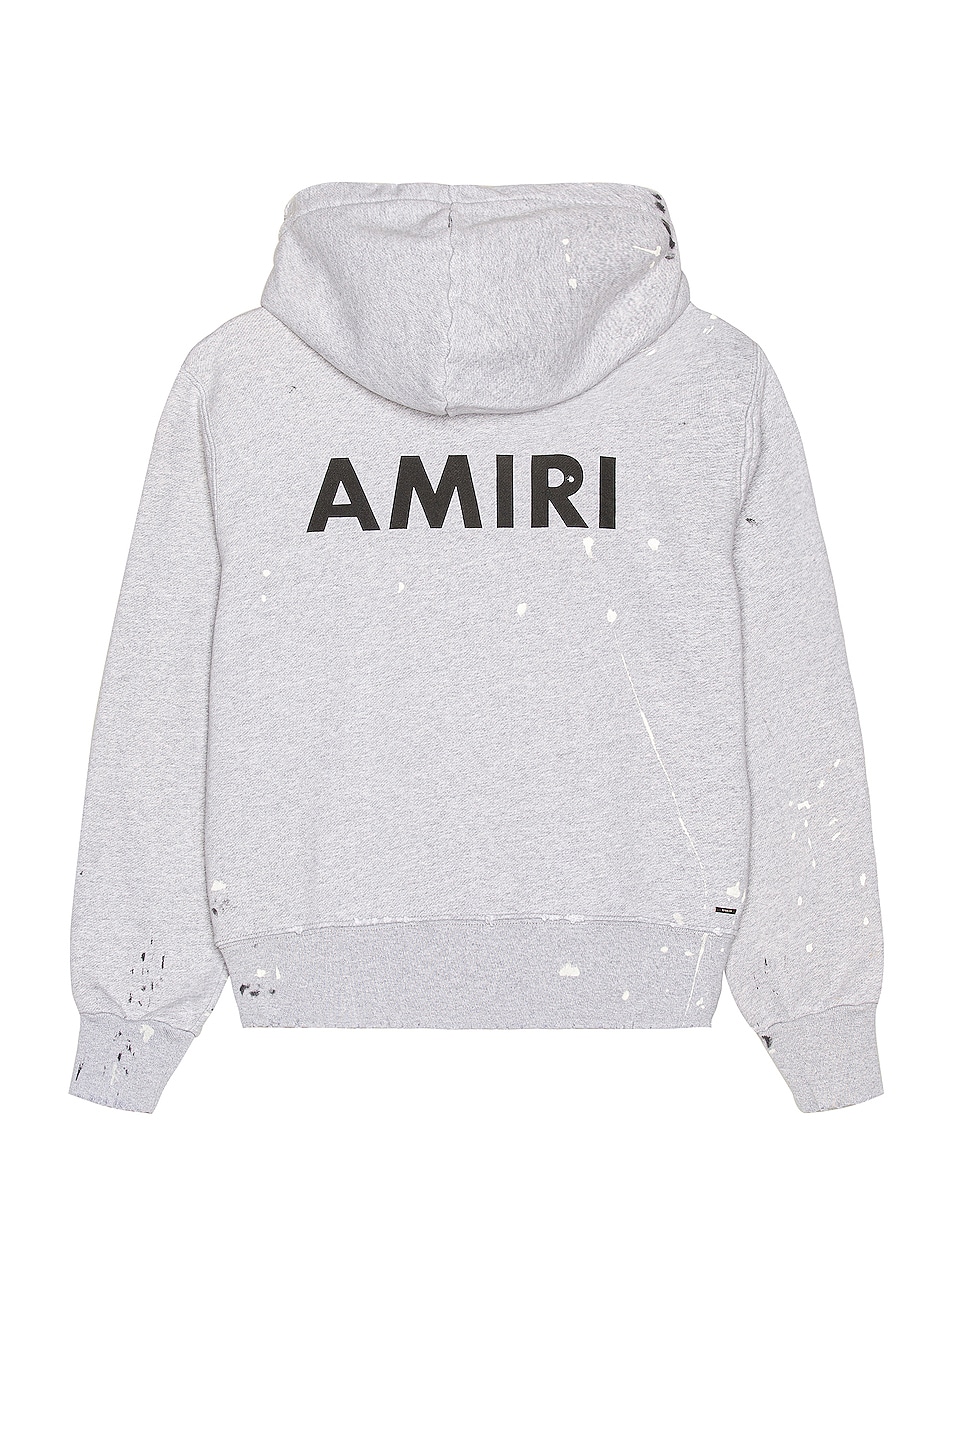 Image 1 of Amiri Army Paint Hoodie in Heather Grey in Heather Gray